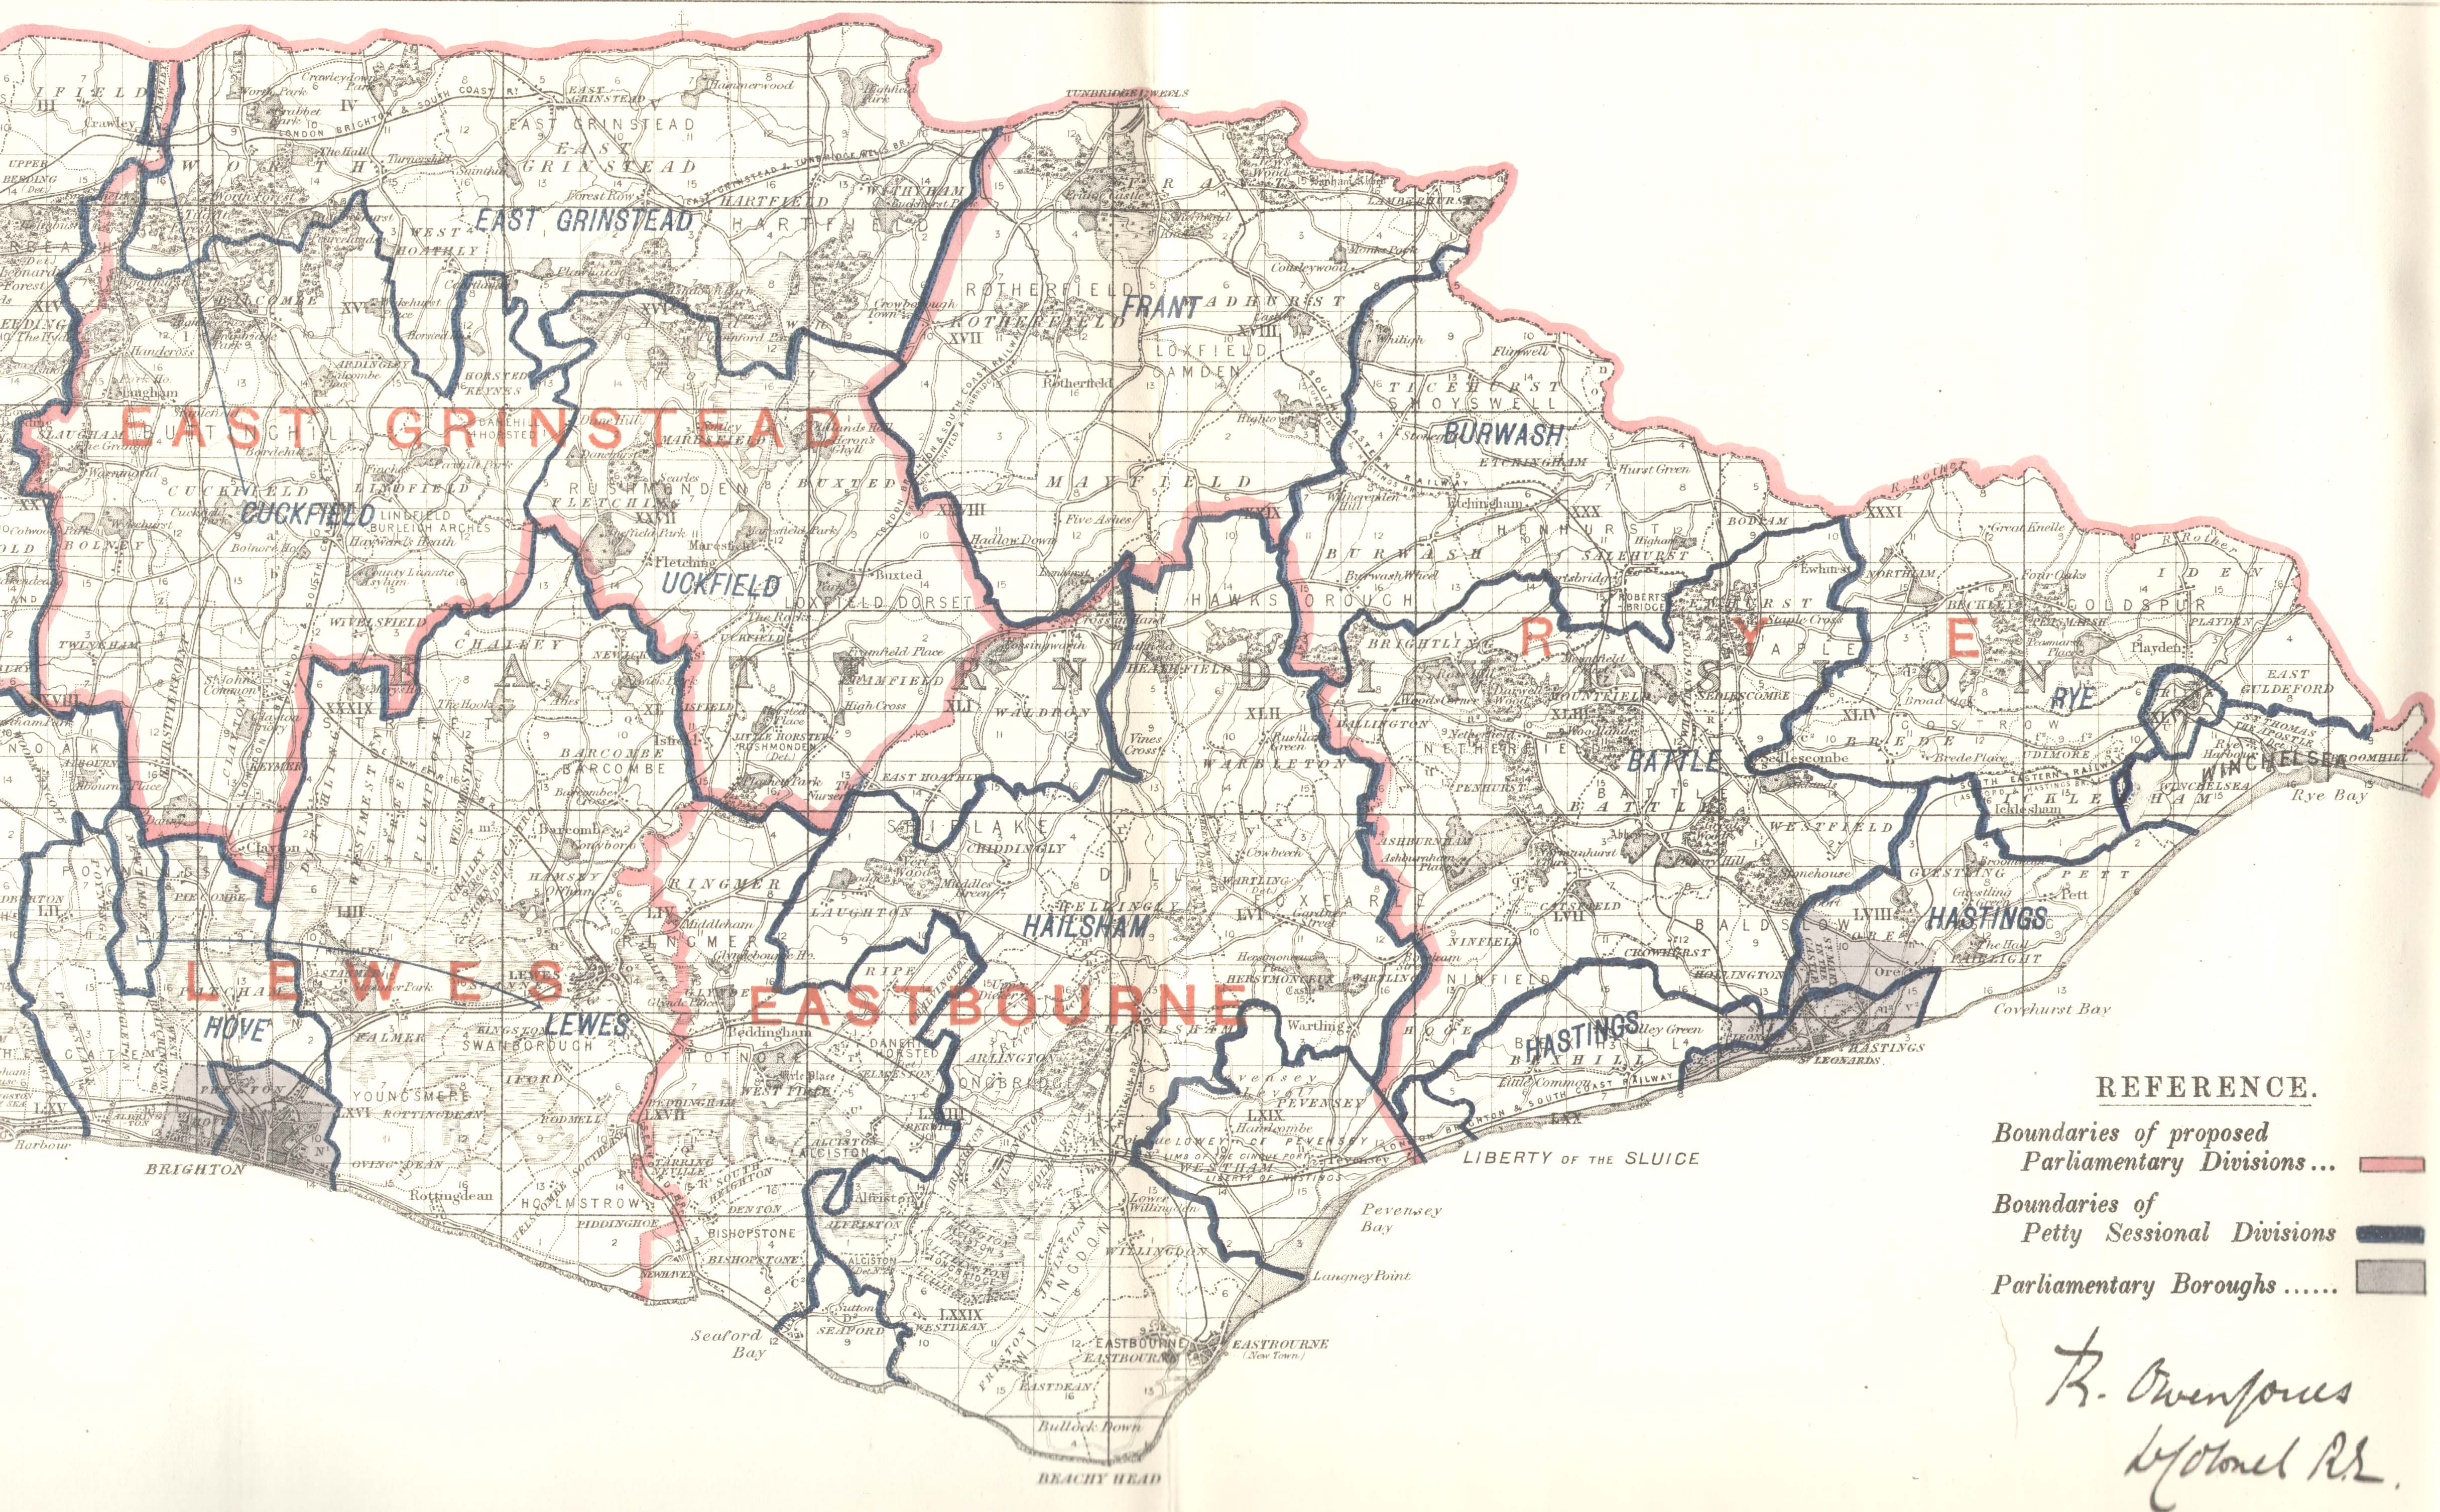 Map of the County of Sussex, East,  published 1885